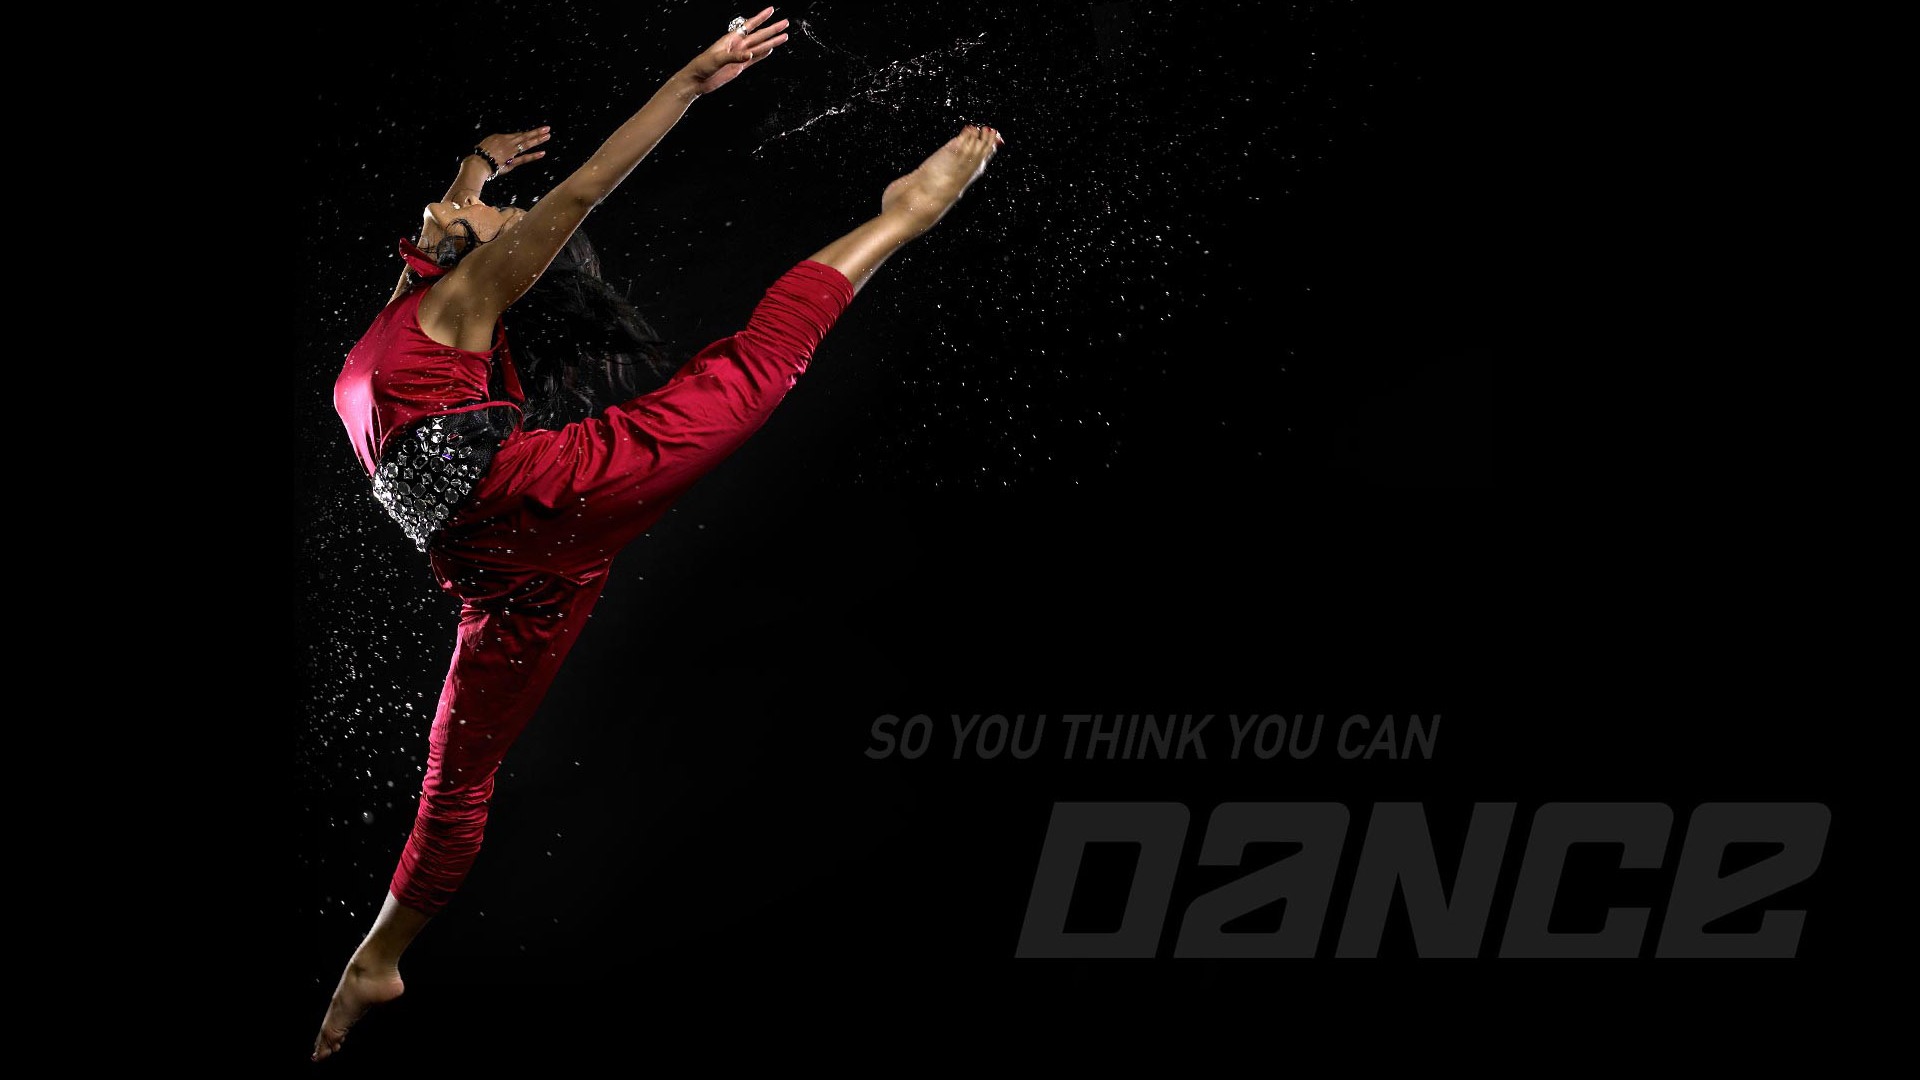 So You Think You Can Dance wallpaper (1) #9 - 1920x1080